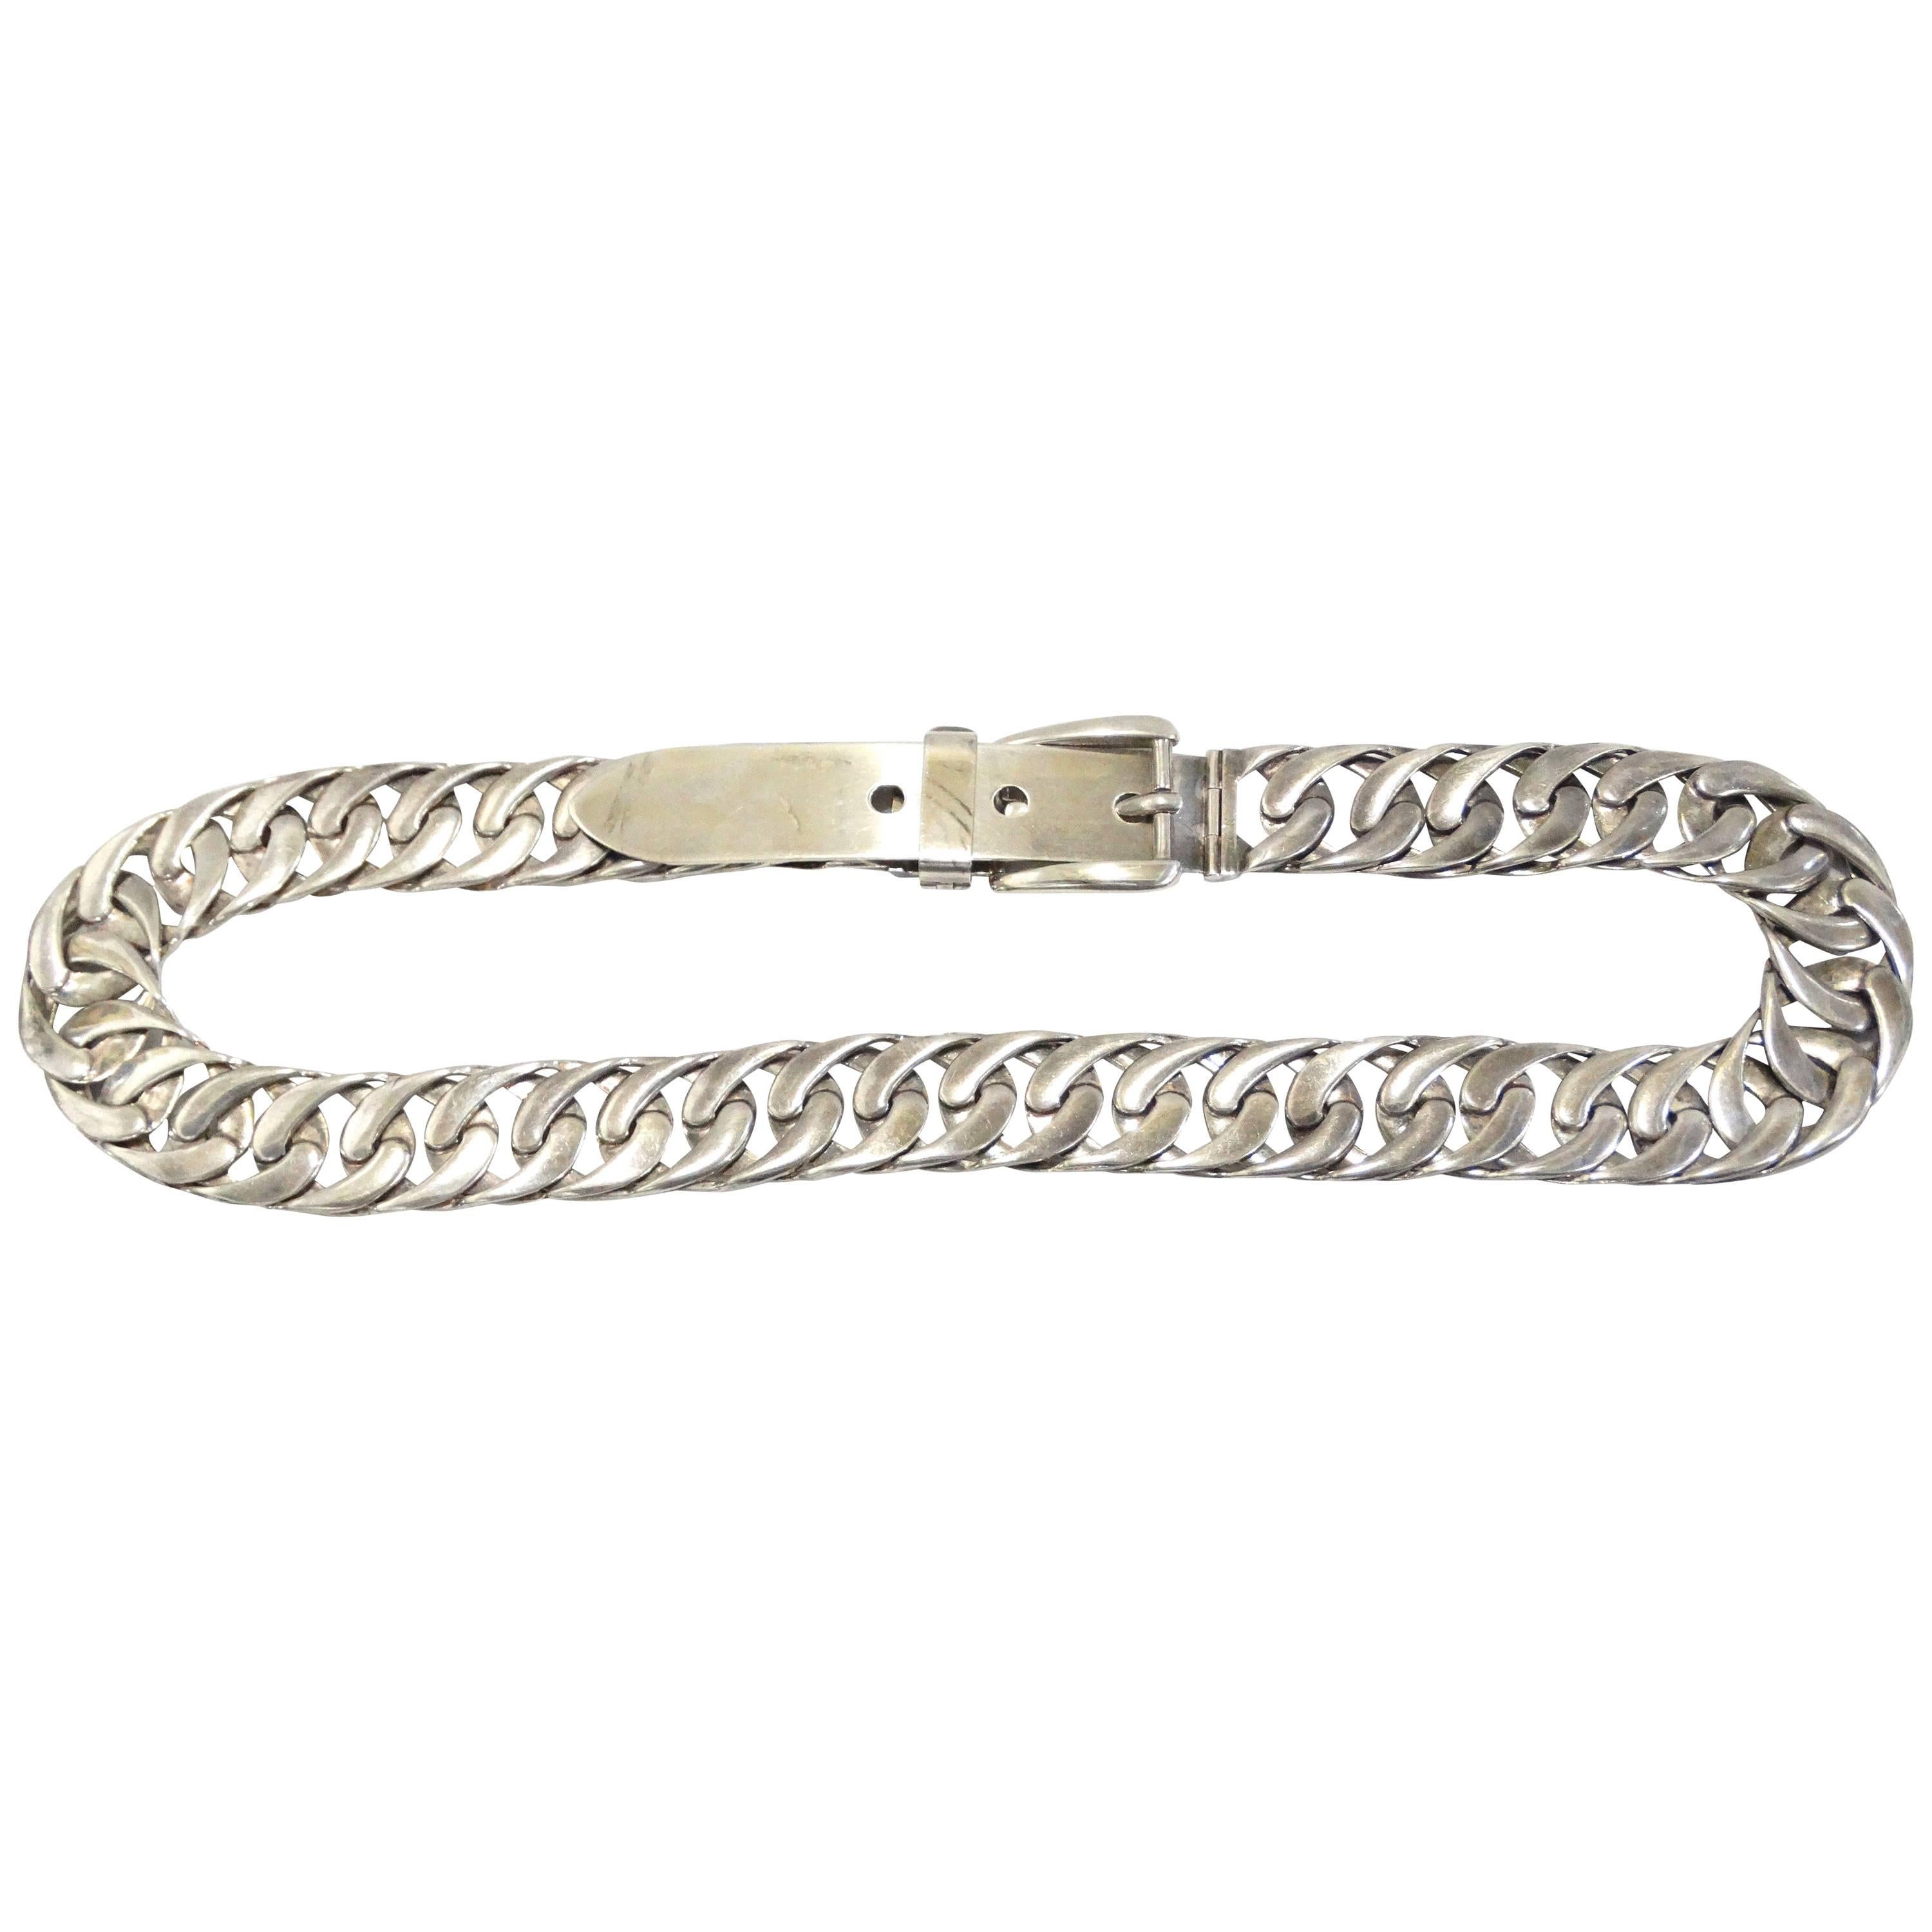 Rare 1970s Gucci Sterling Silver Chain Flat Link Belt